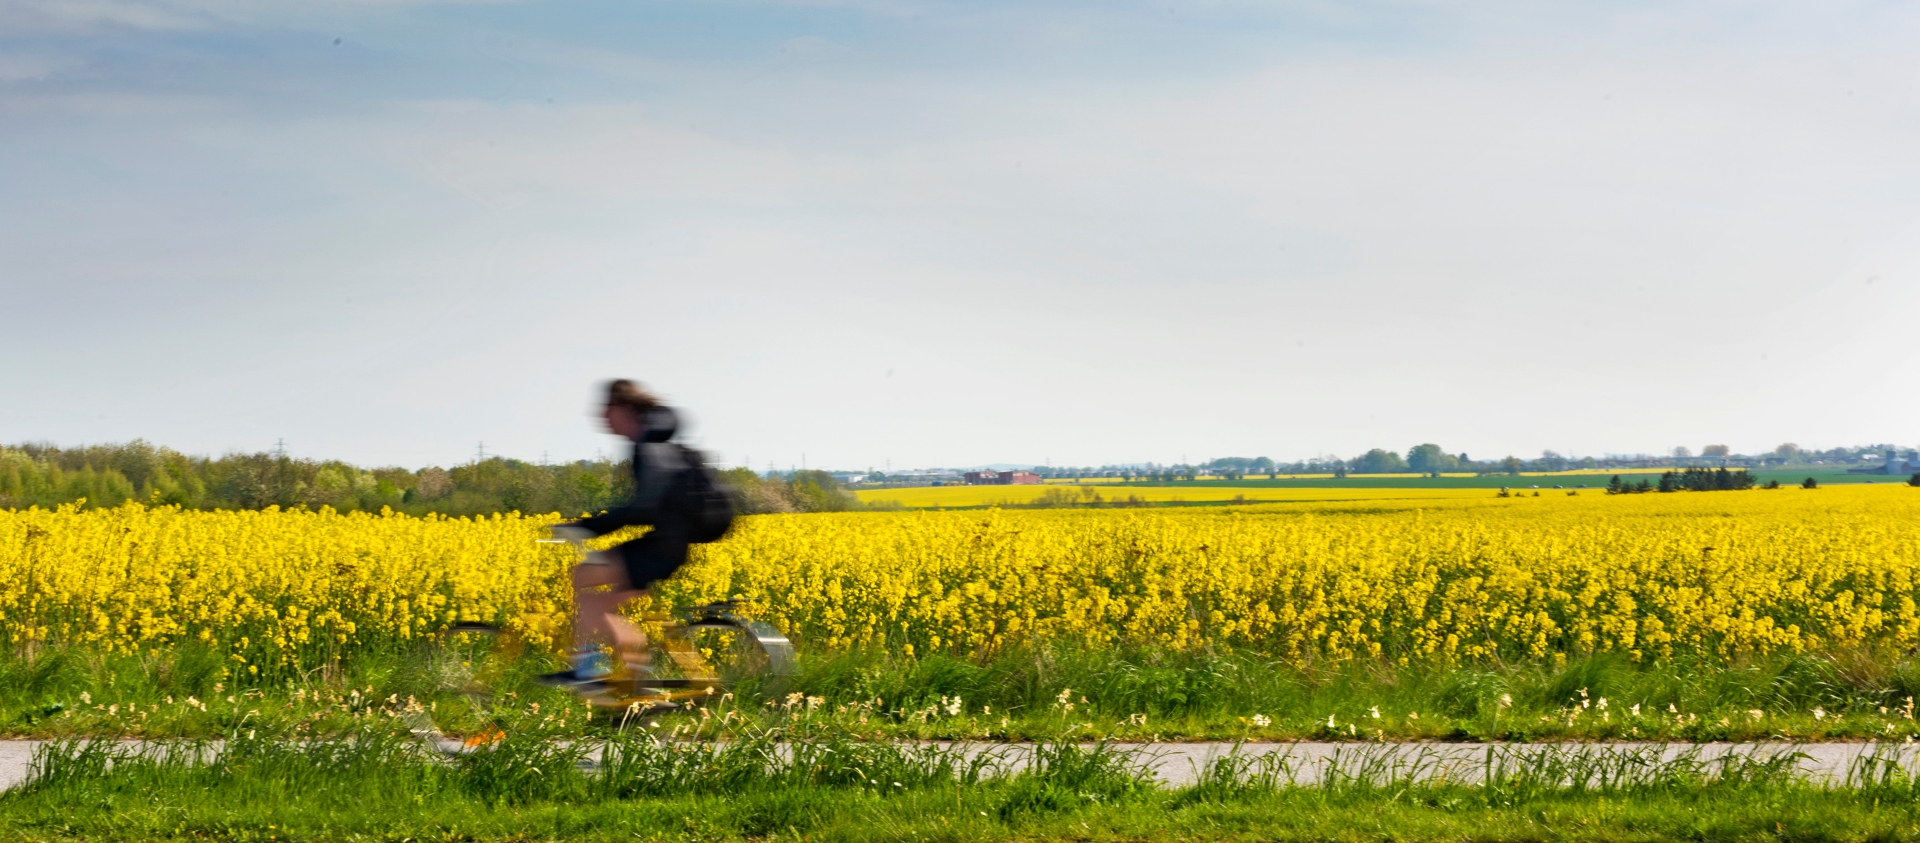 A blurry biker cycles by on a biking lane. In the background a rapeseed field is visible.